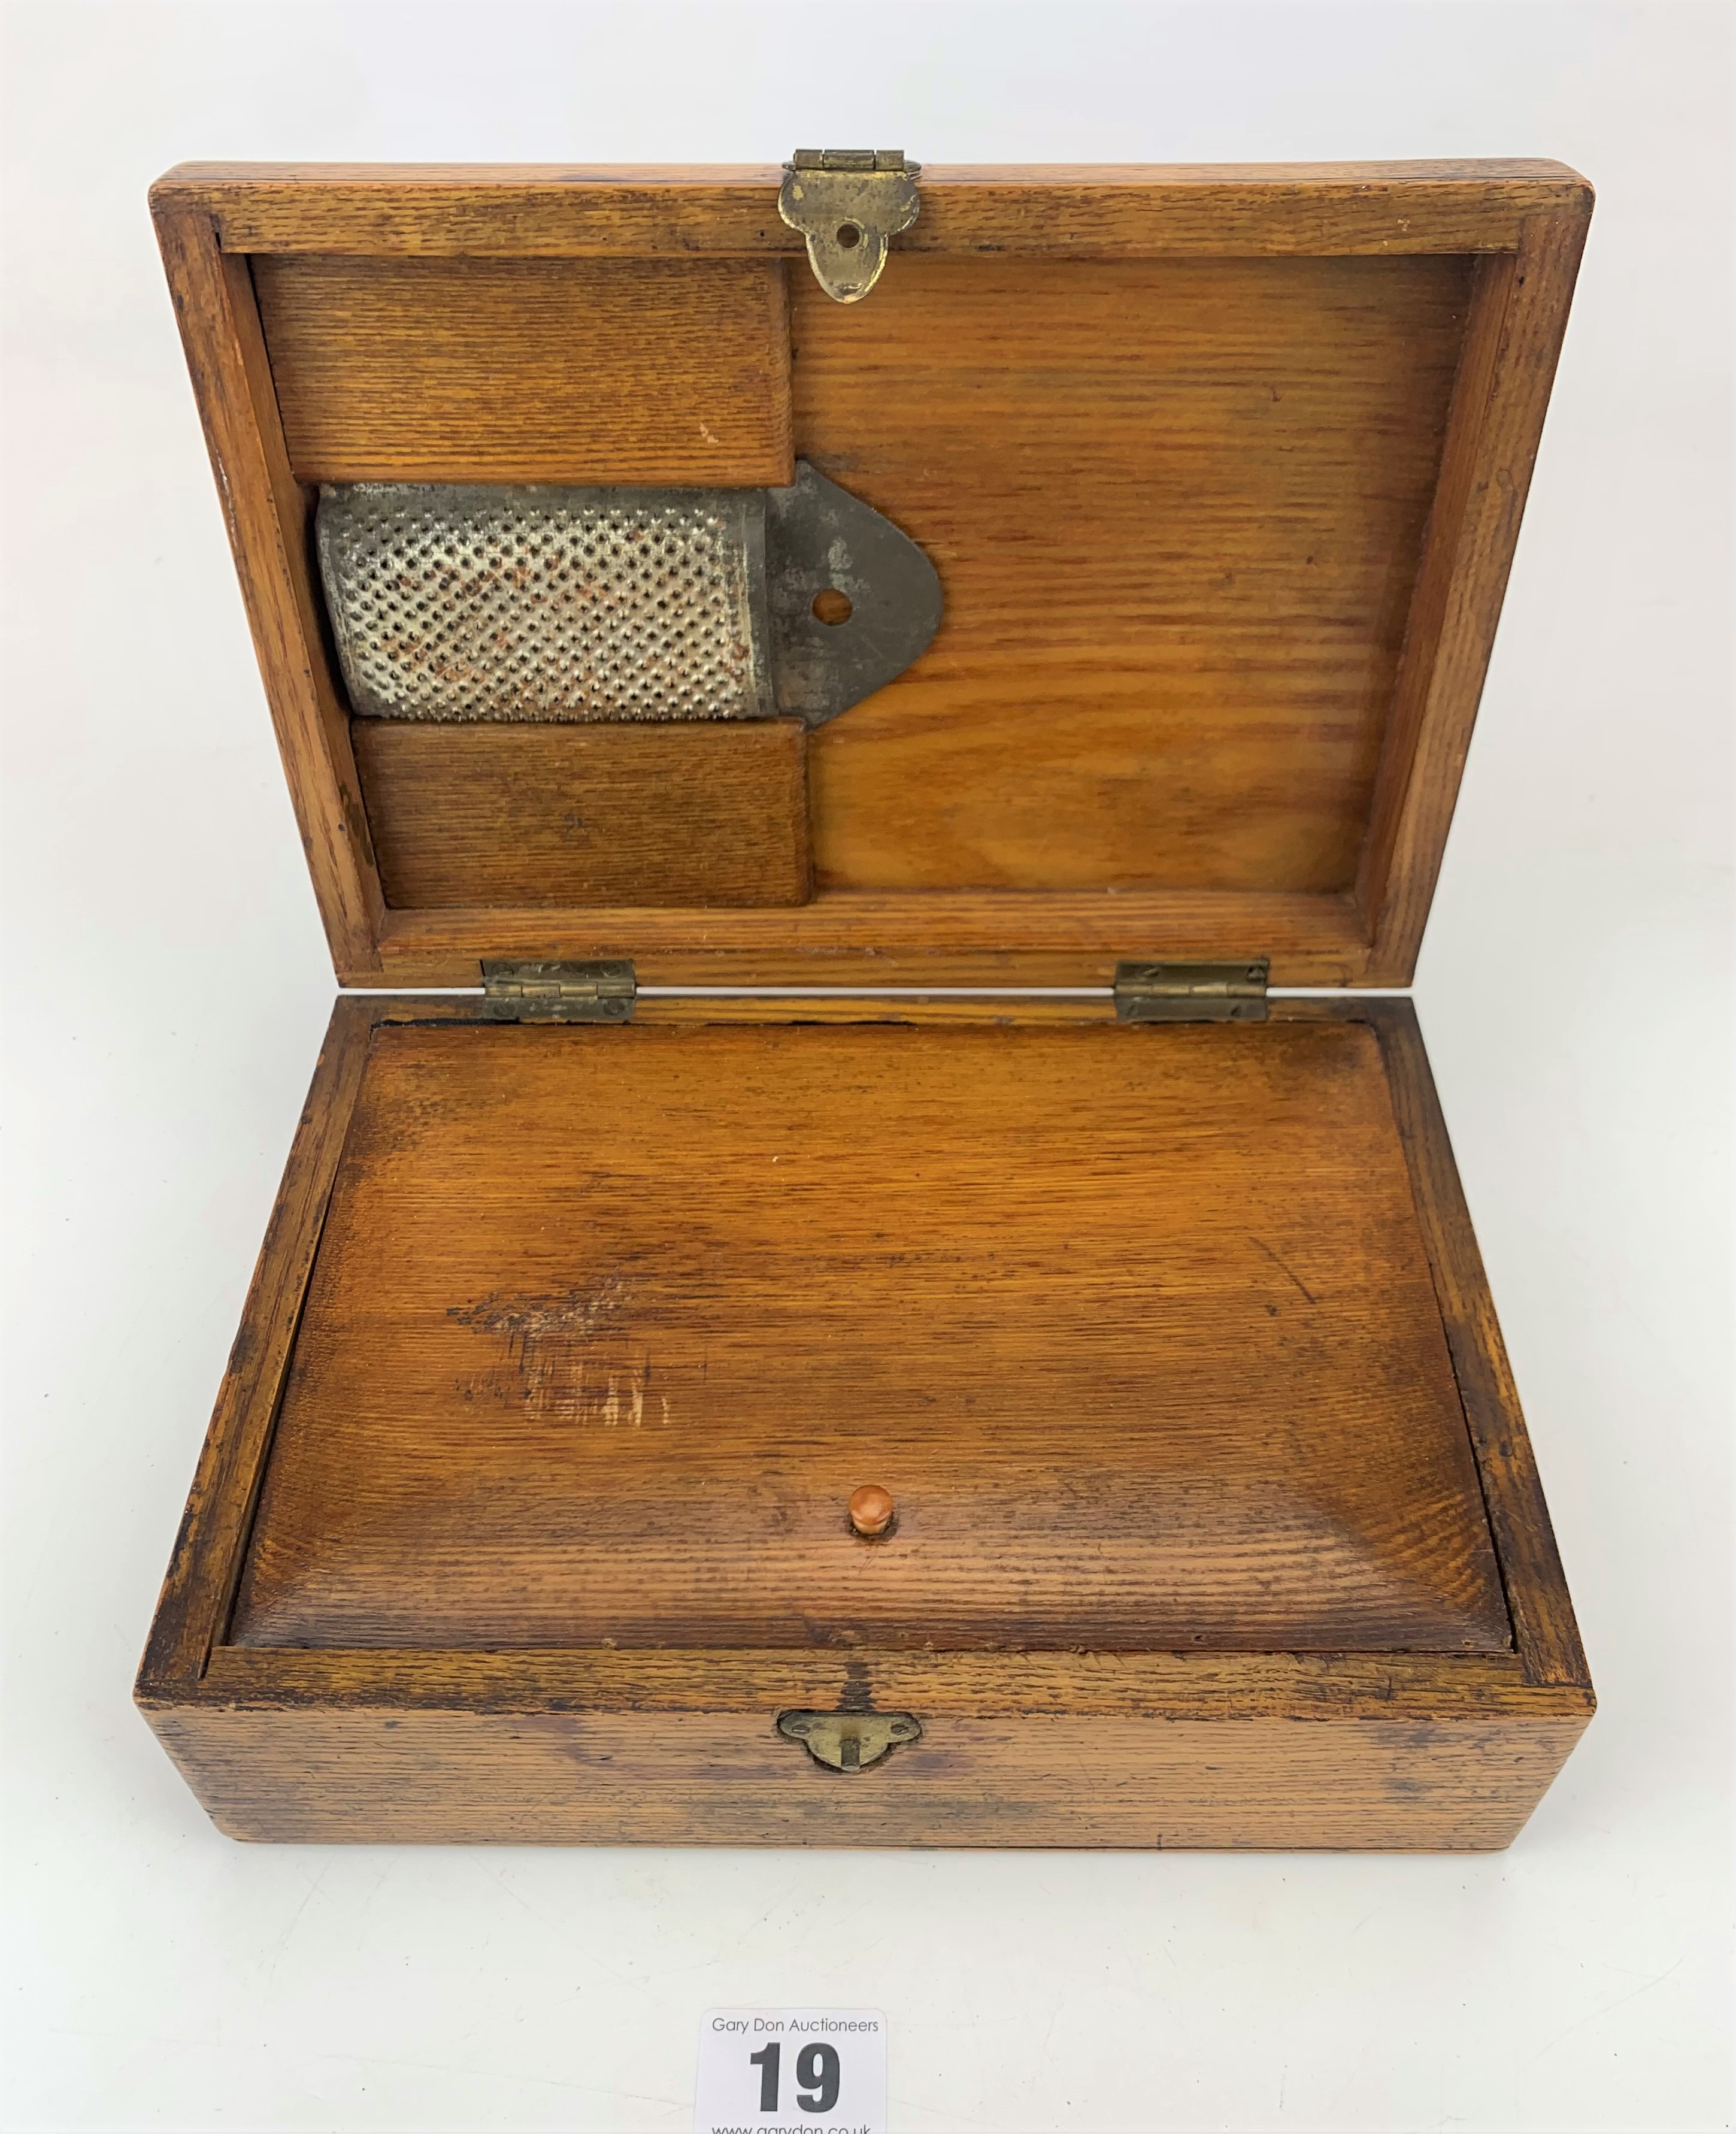 Wood and brass herb box with nutmeg grater